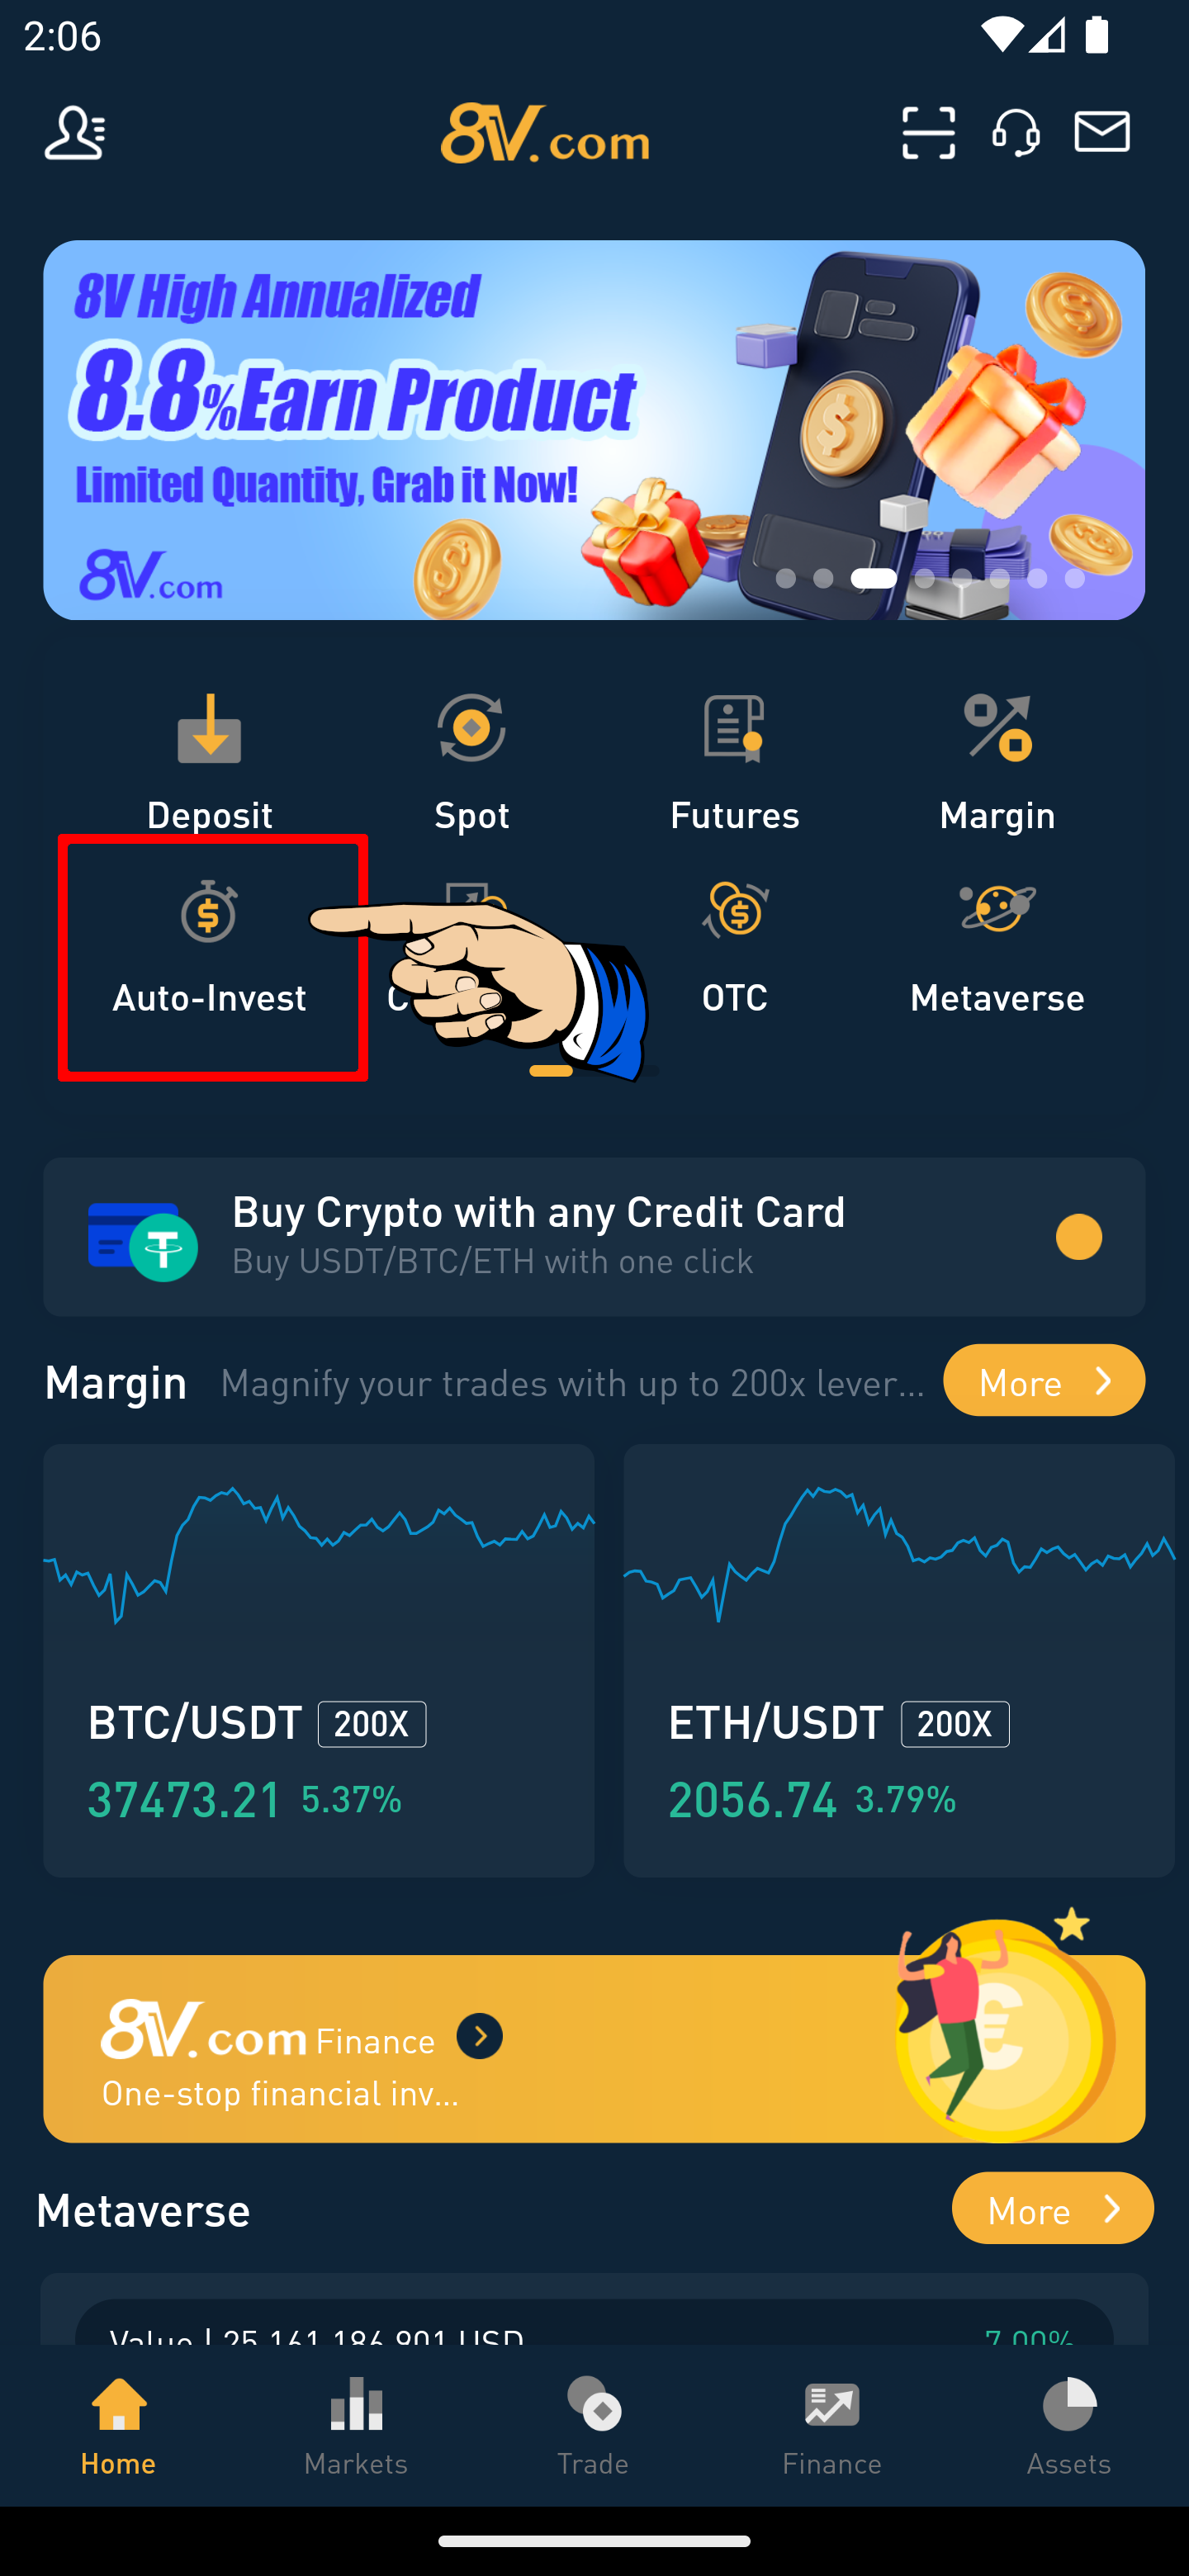 screenshot of 8V app homescreen with the auto-invest selection highlighted